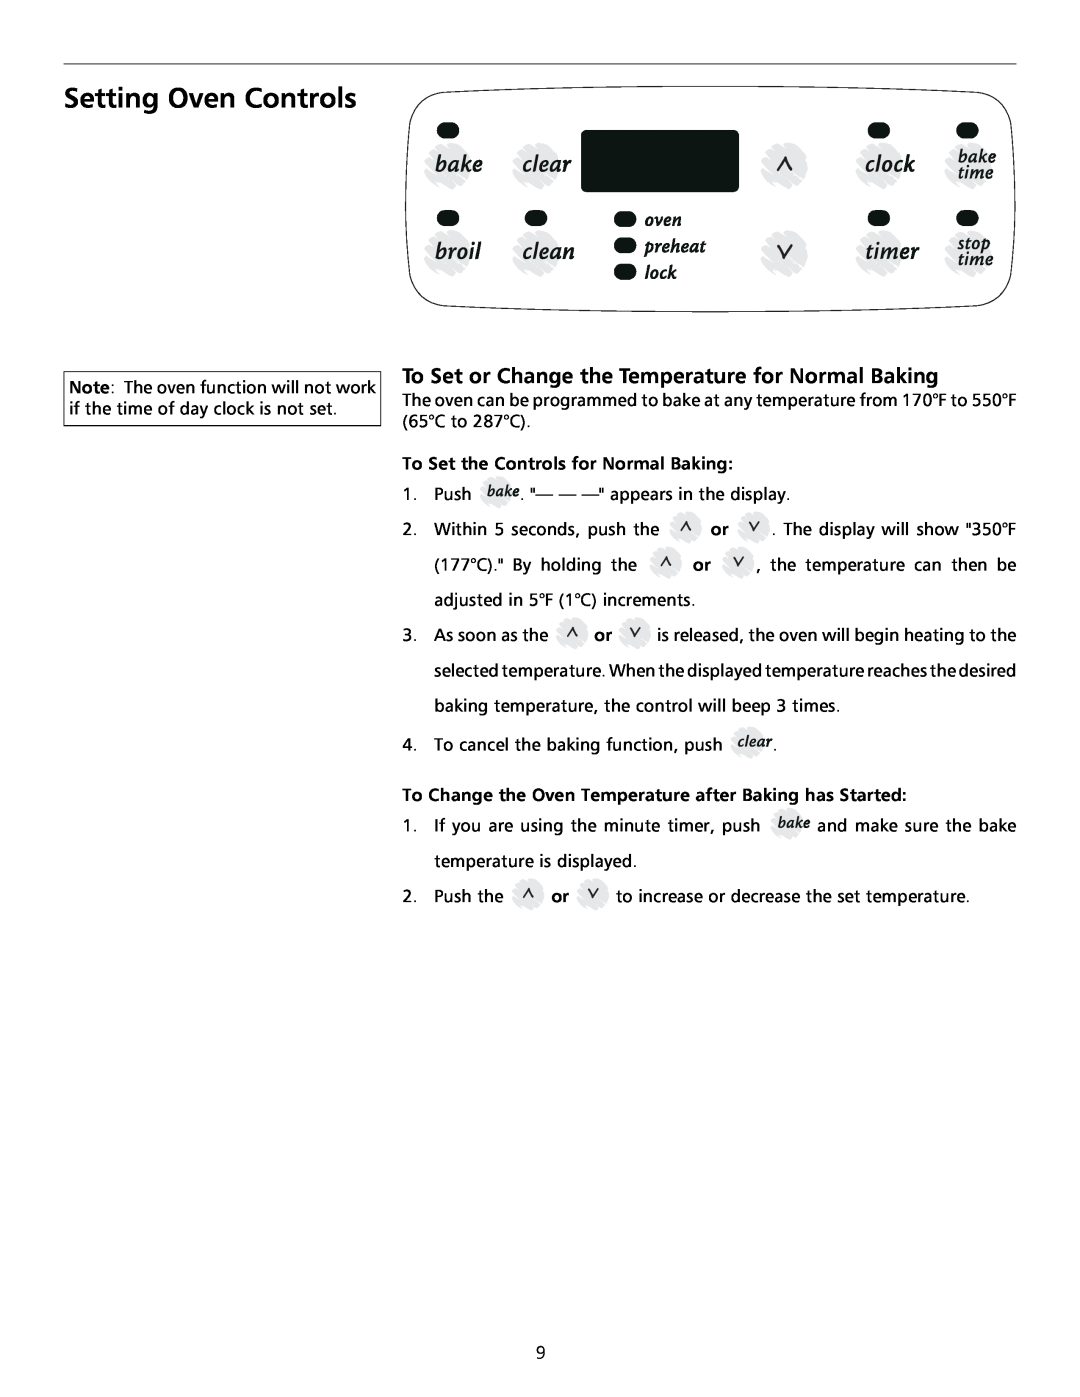 Tappan 316000182 important safety instructions Setting Oven Controls, To Set or Change the Temperature for Normal Baking 